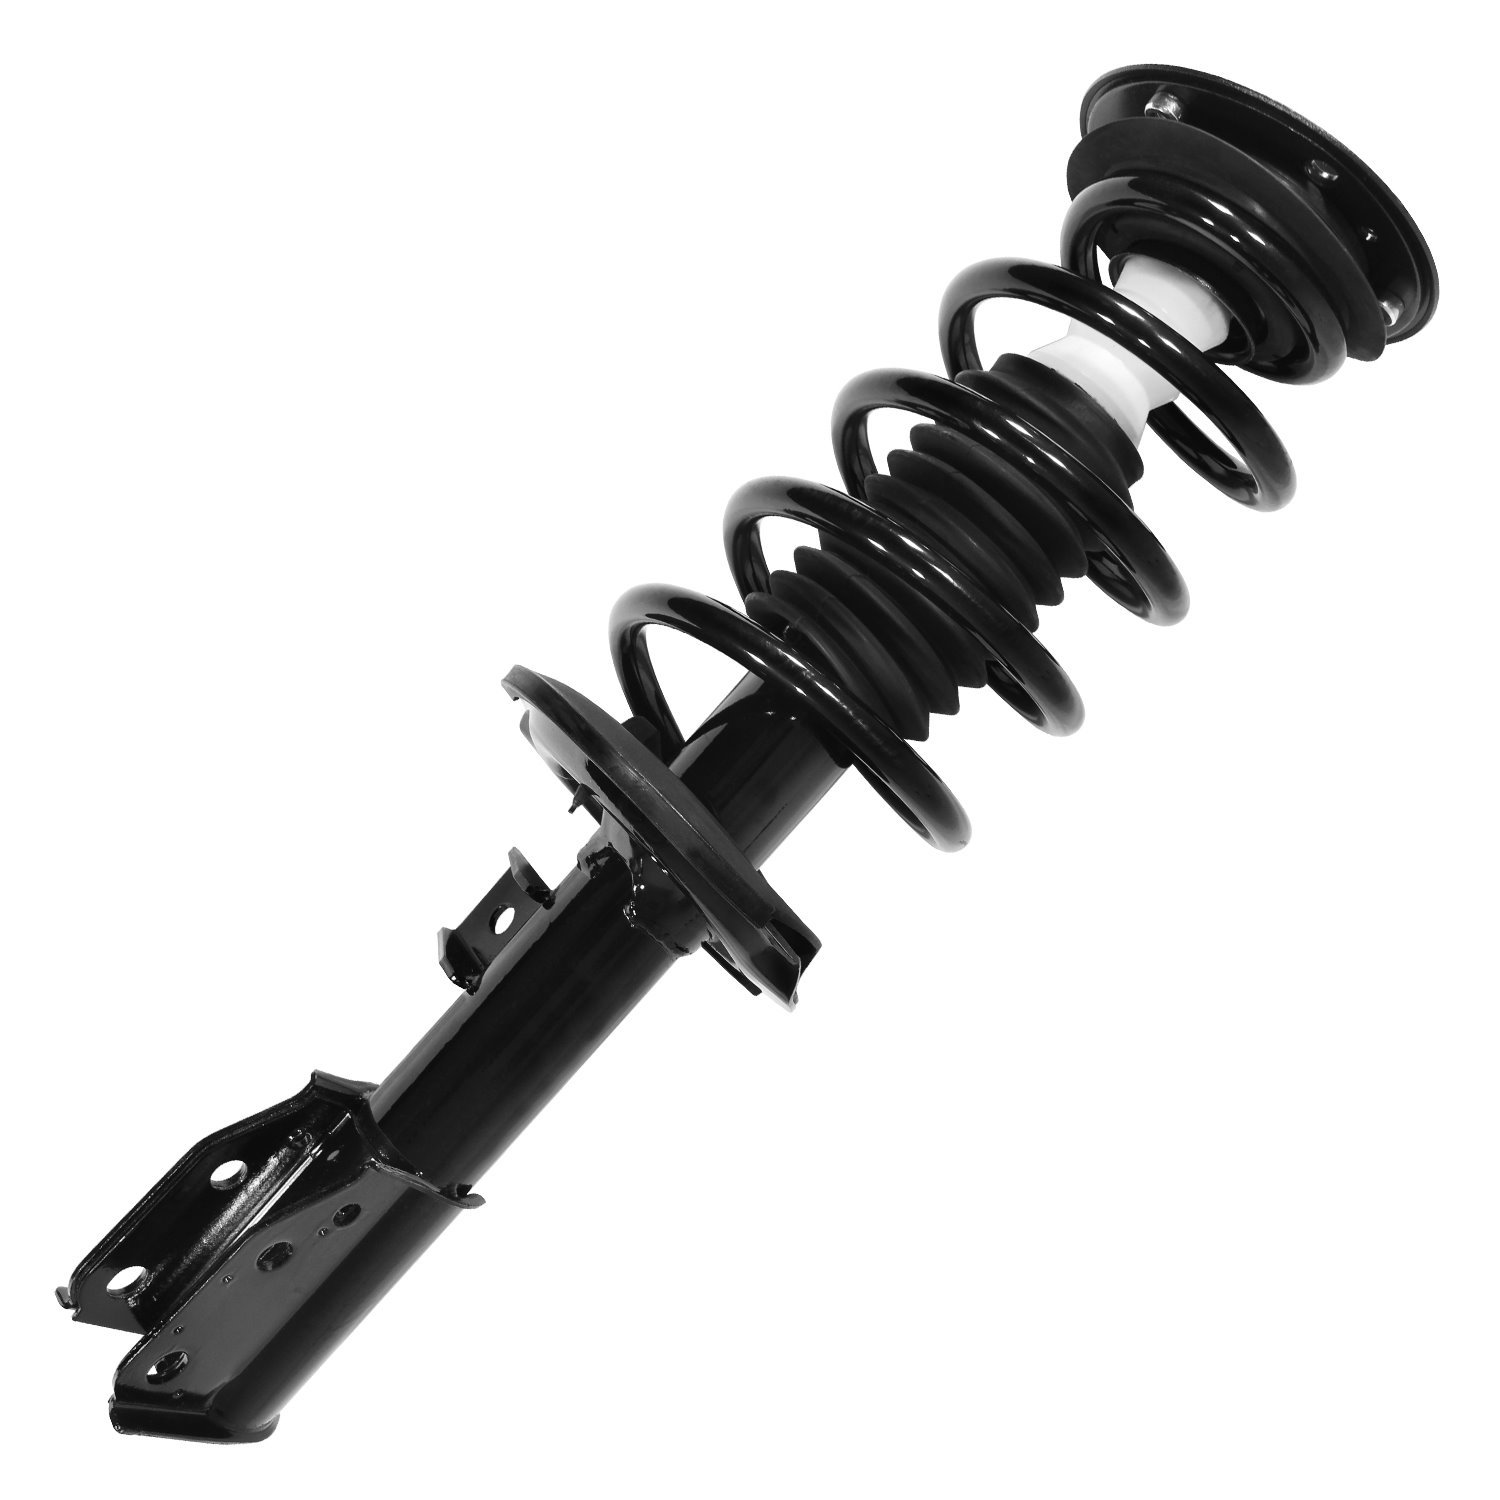 11874 Suspension Strut & Coil Spring Assembly Fits Select Chevy Equinox, Pontiac Torrent, Saturn Vue